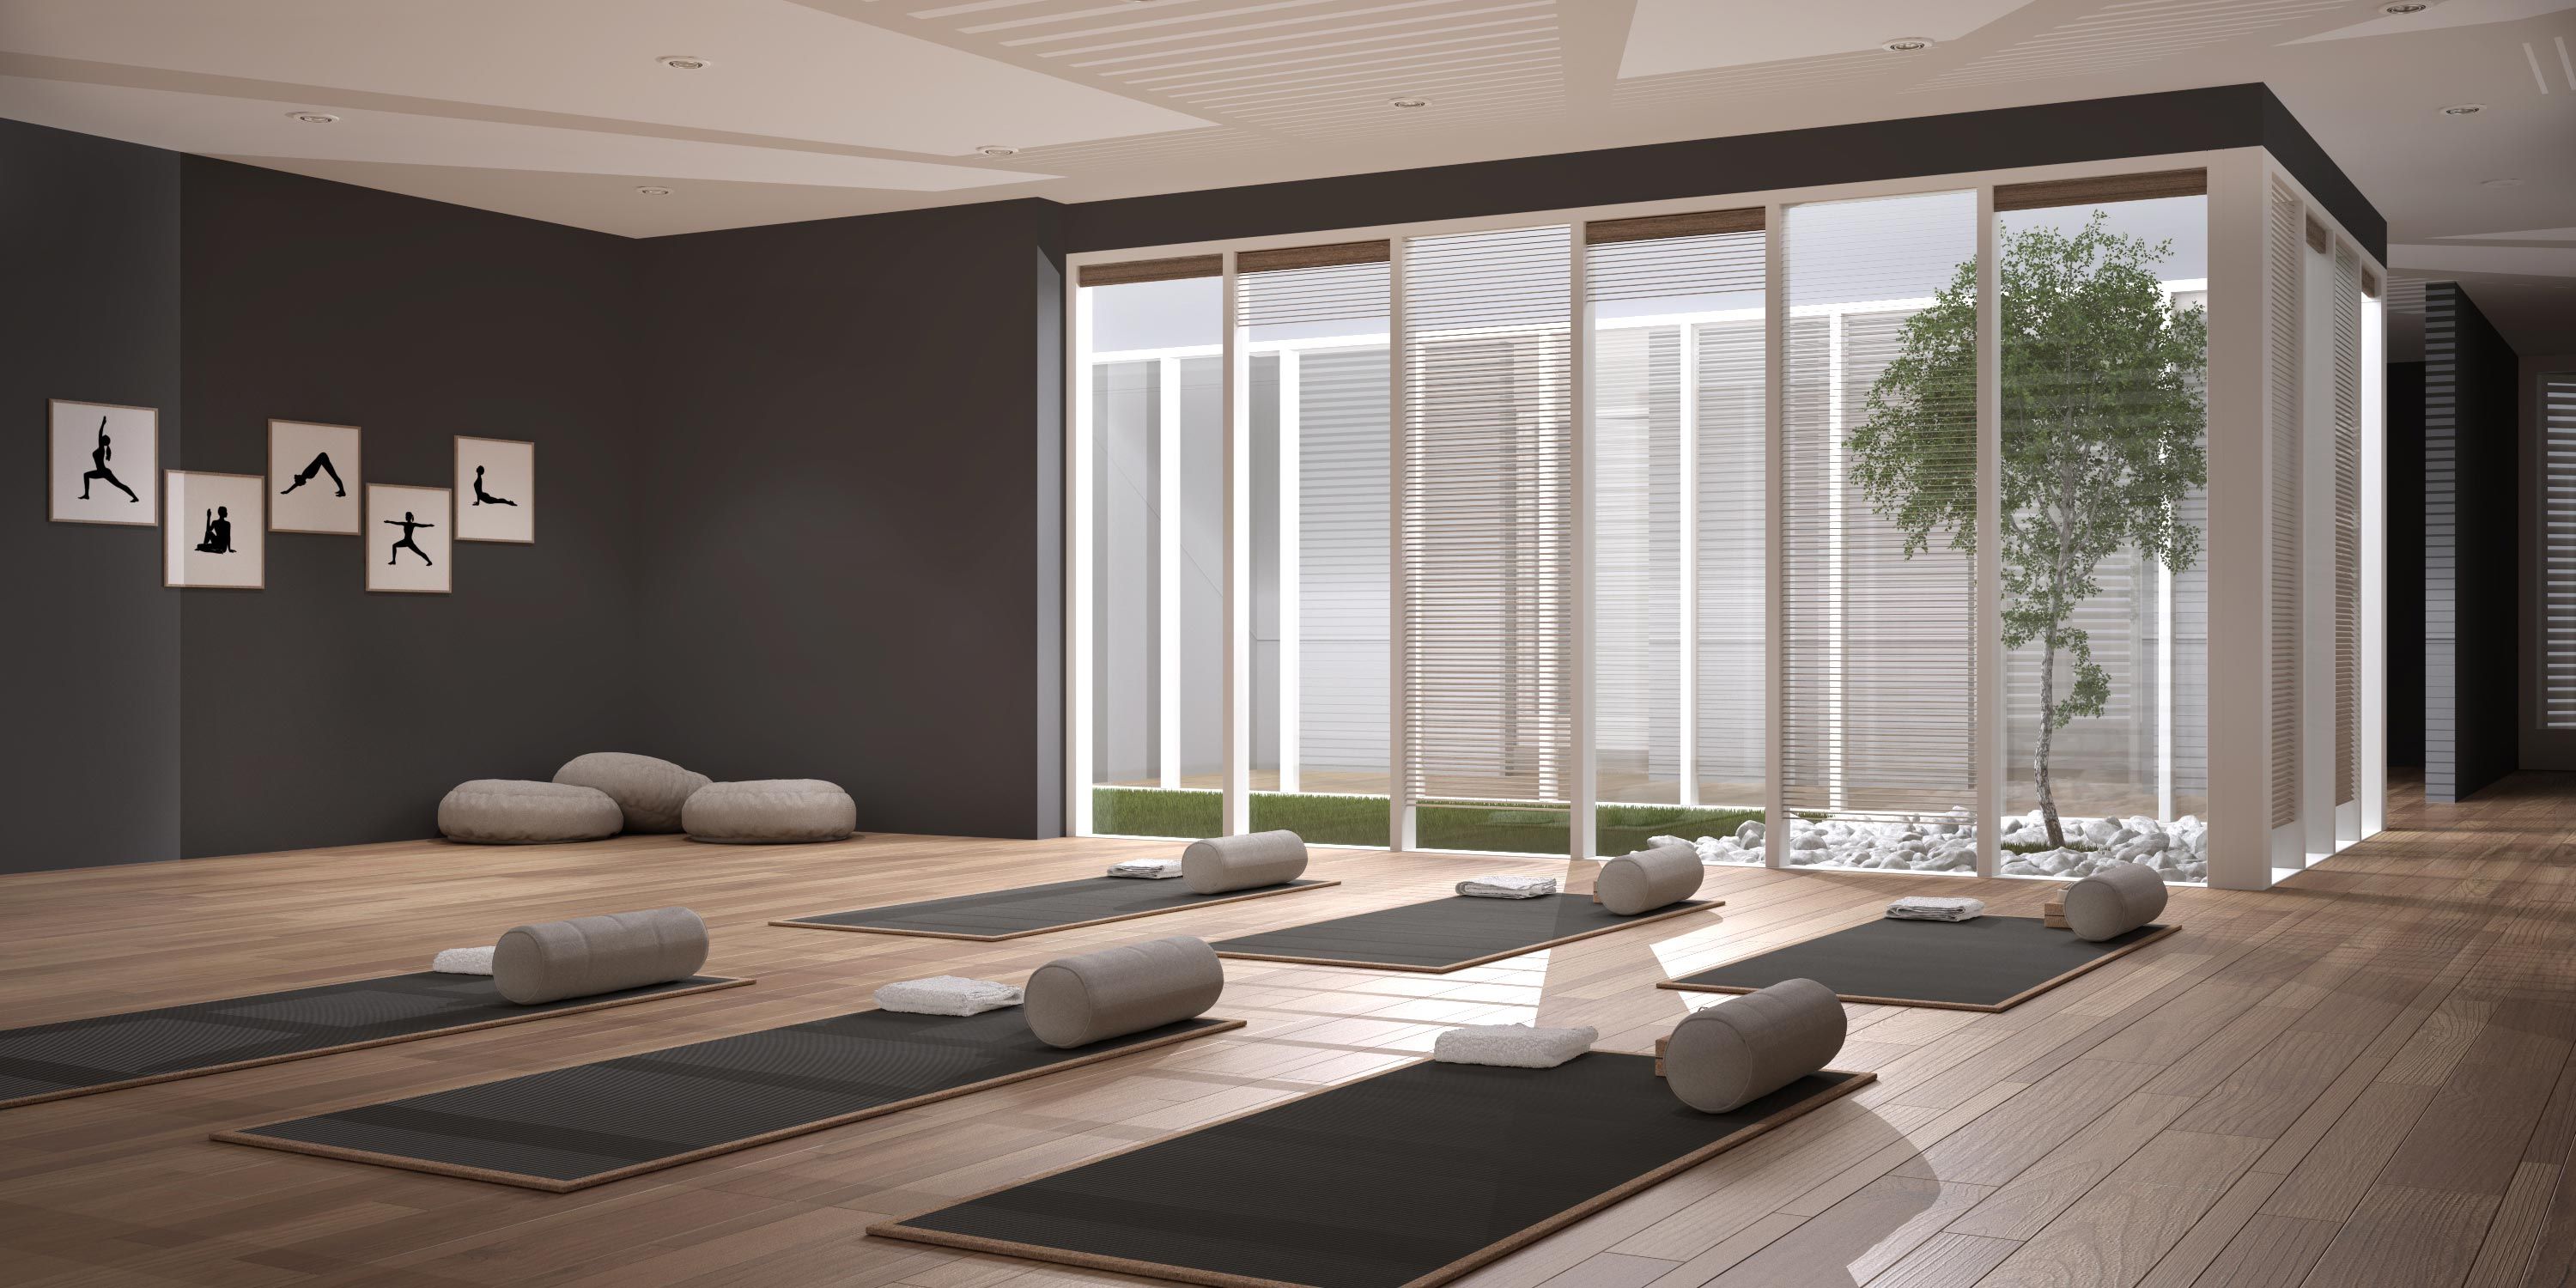 Yoga Studio in neutral and dark colors with custom shading